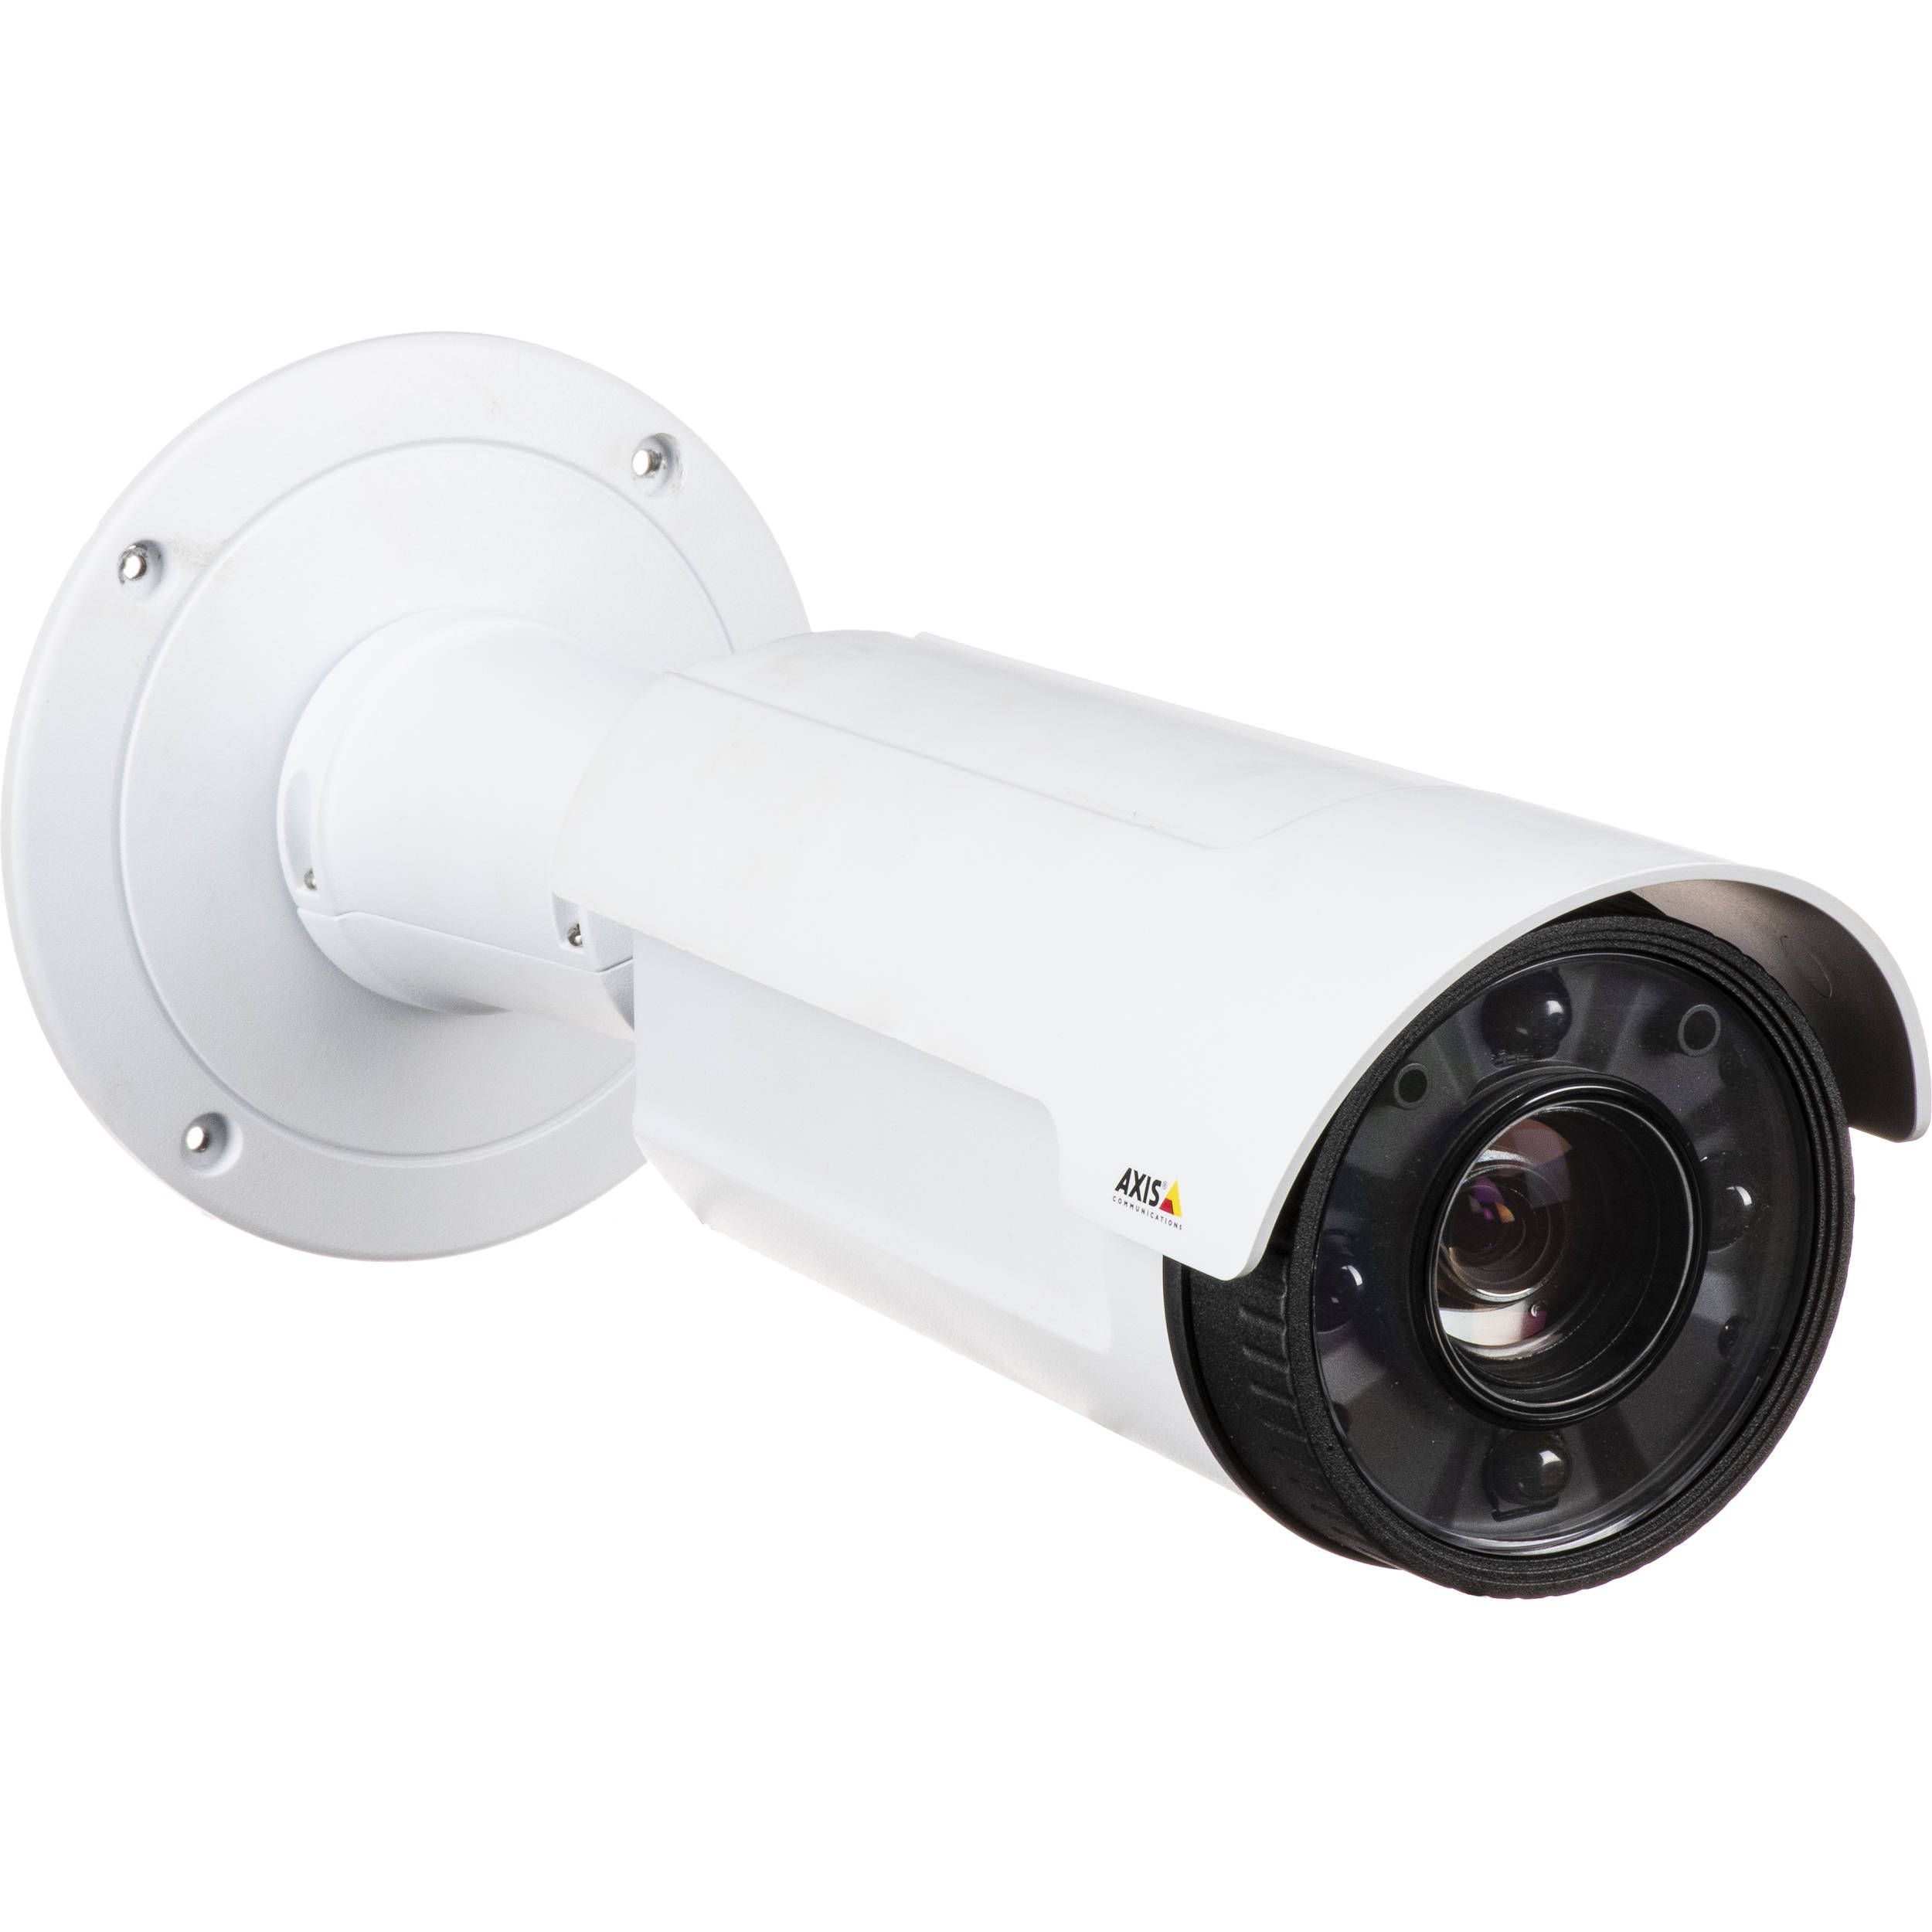 Axis 0509-001 Q1765-LE Day/Night Outdoor HD Network Bullet Camera White